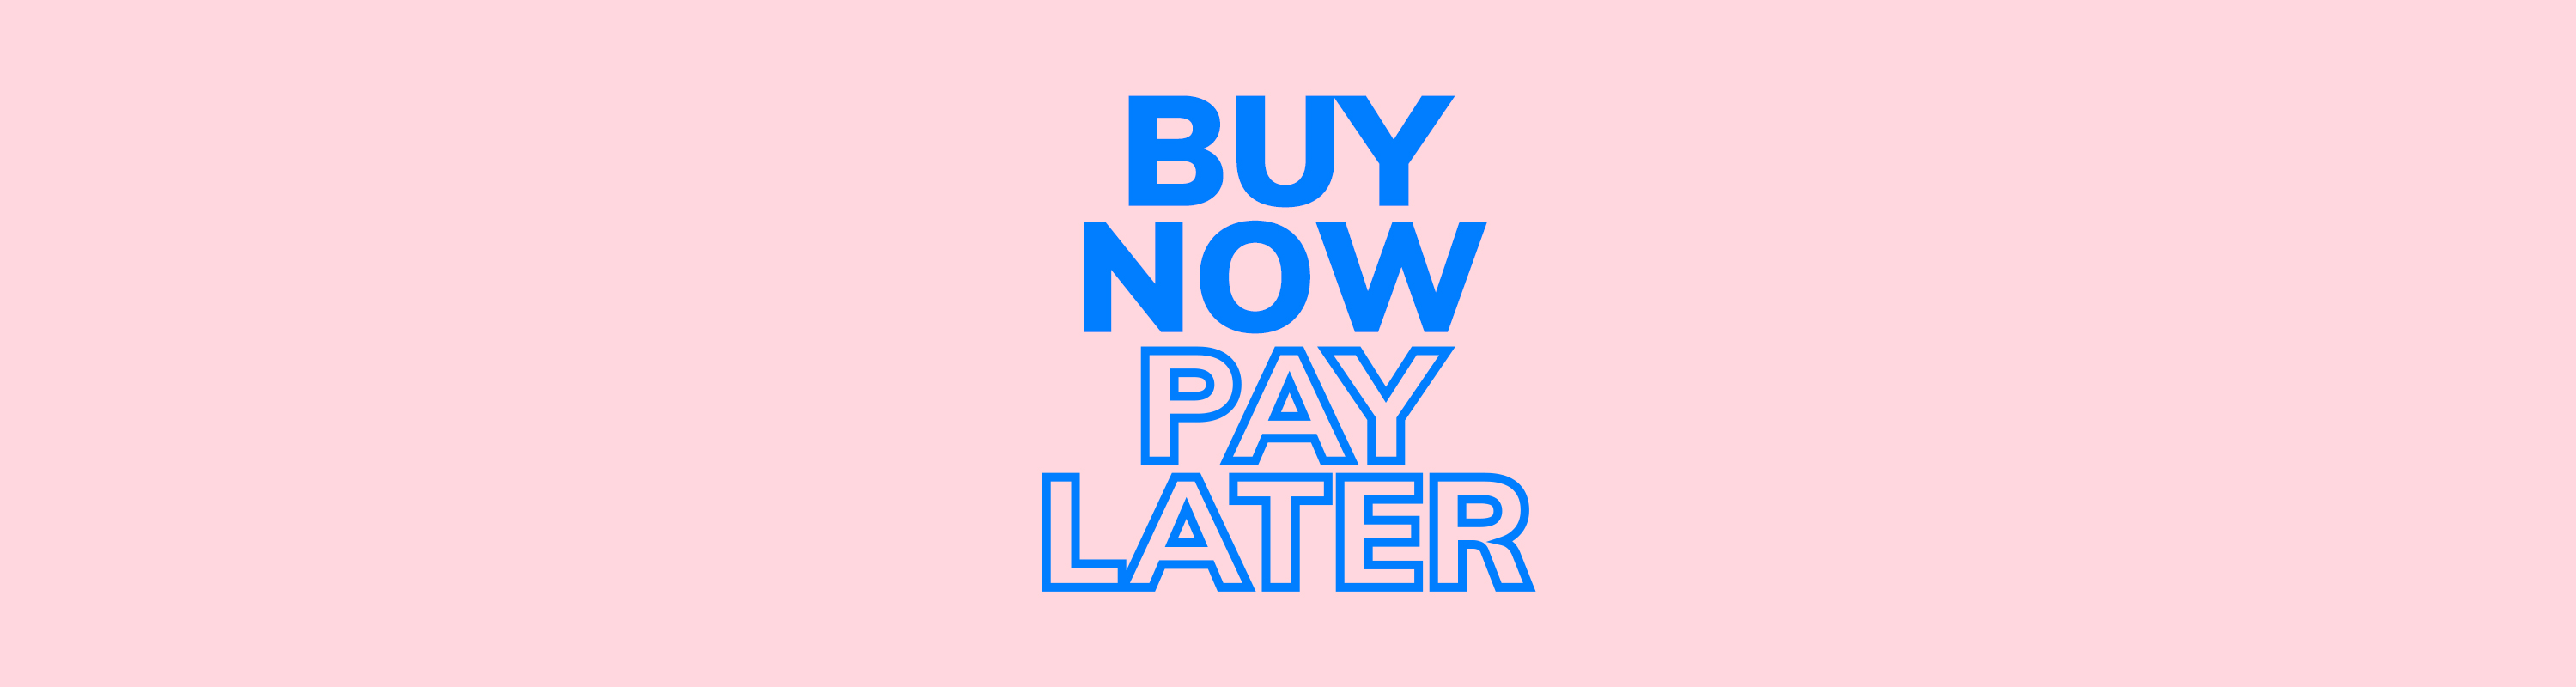 Increasing Sales With Buy Now Pay Later